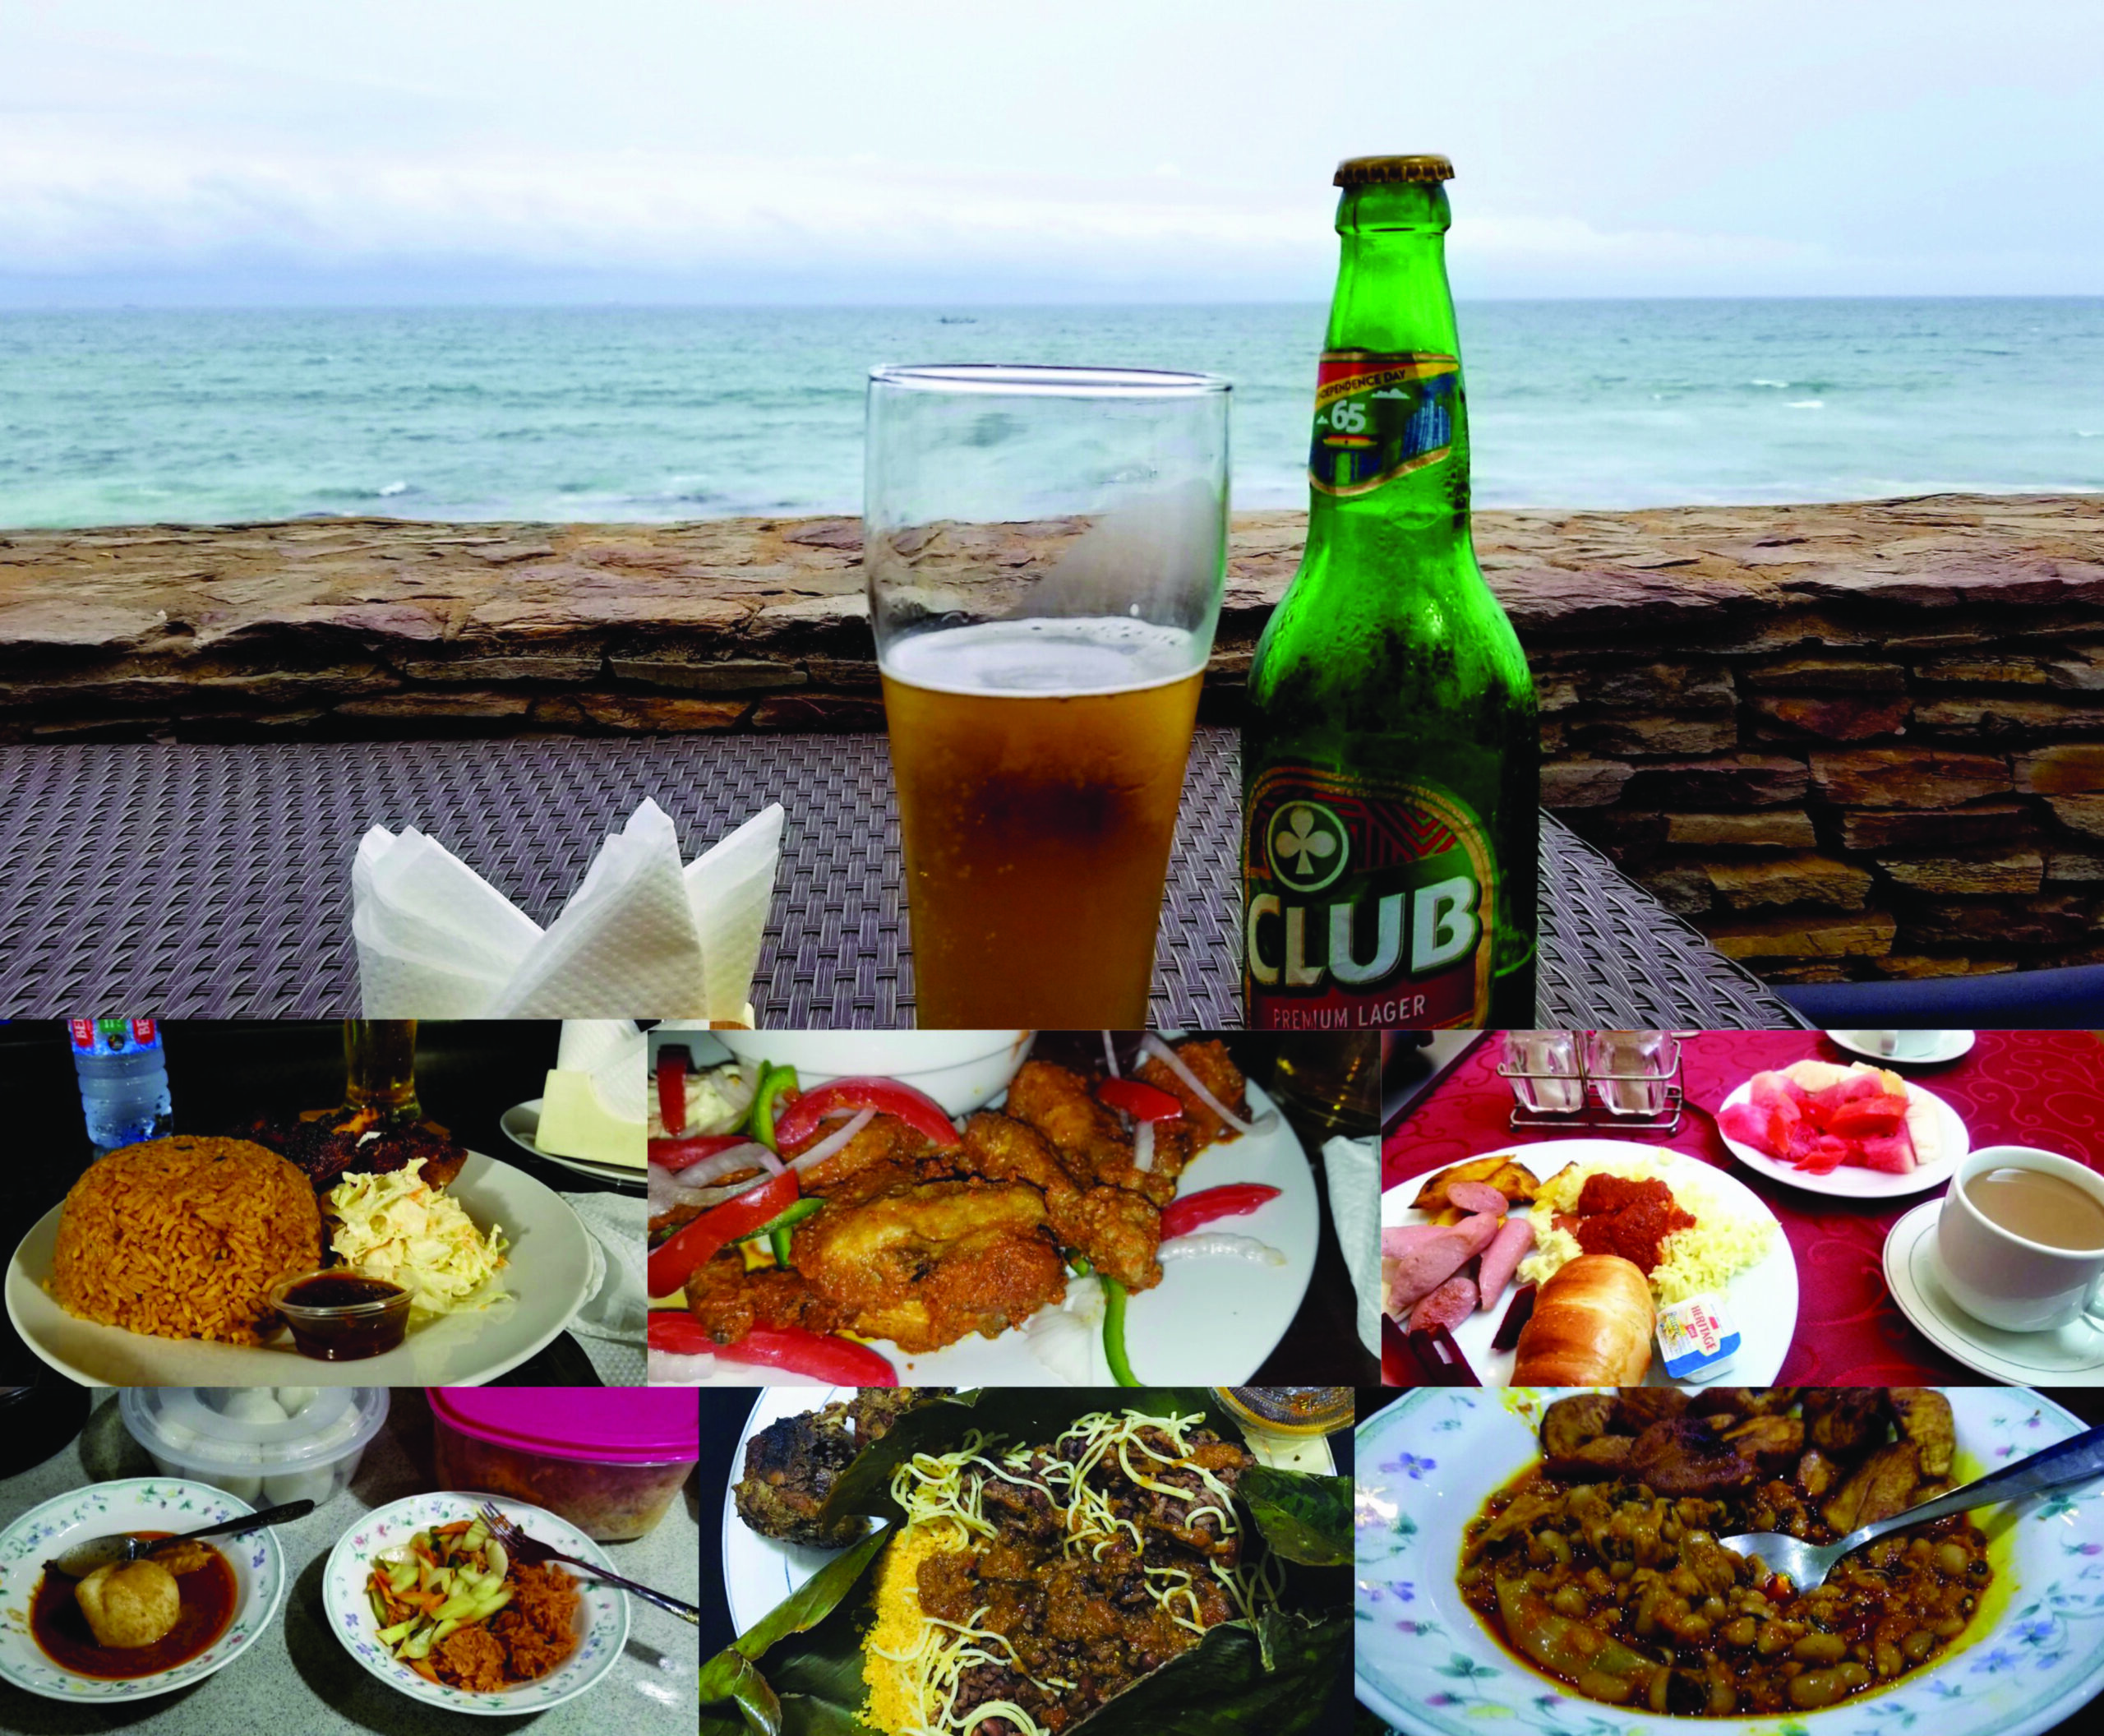 CLUB BEER, made in Ghana, is a Ghanaian favorite along with jollof rice, fufu, banku, waayke (pronounced wah-chay), red red, and shito sauce.